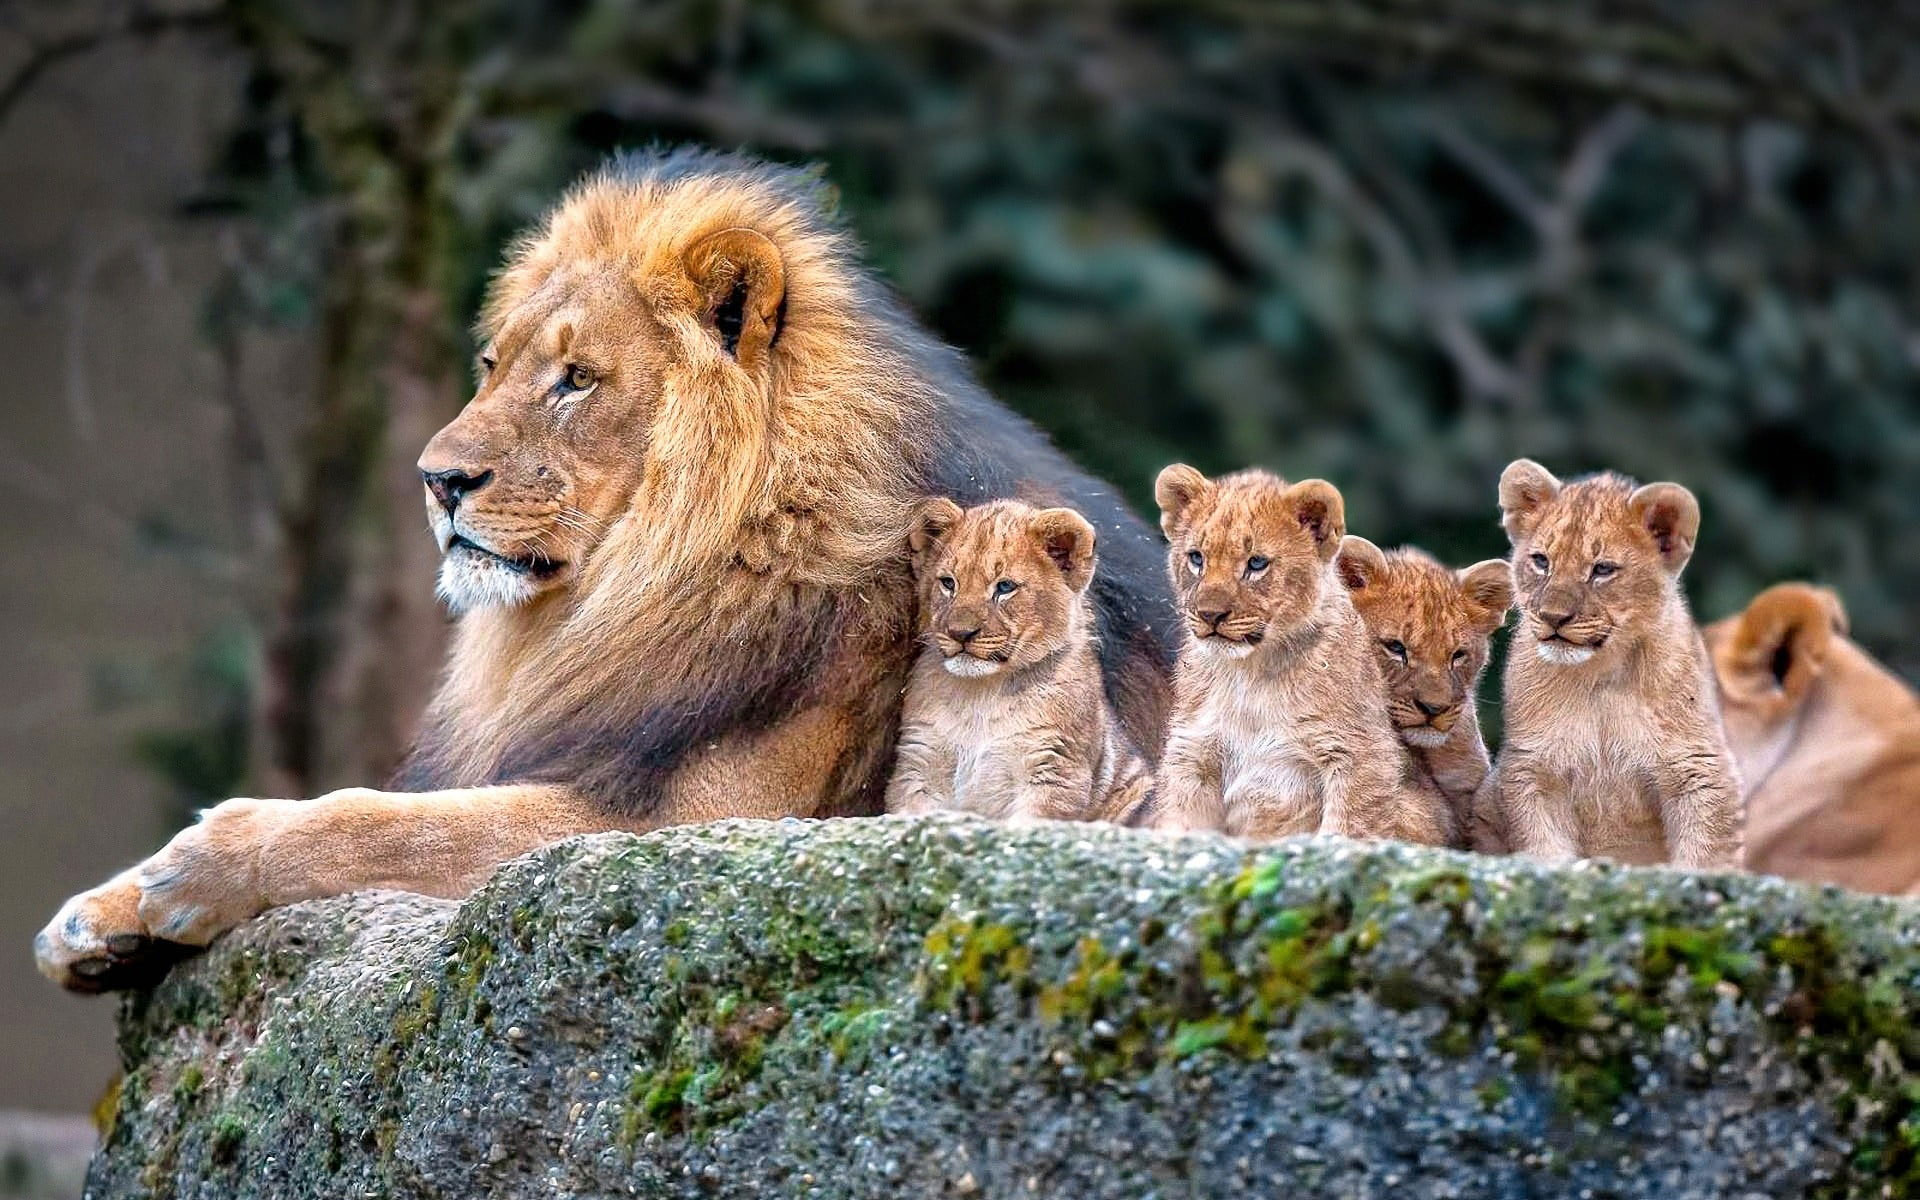 Lion and baby lions wallpaper, nature, animals, baby animals, animal themes